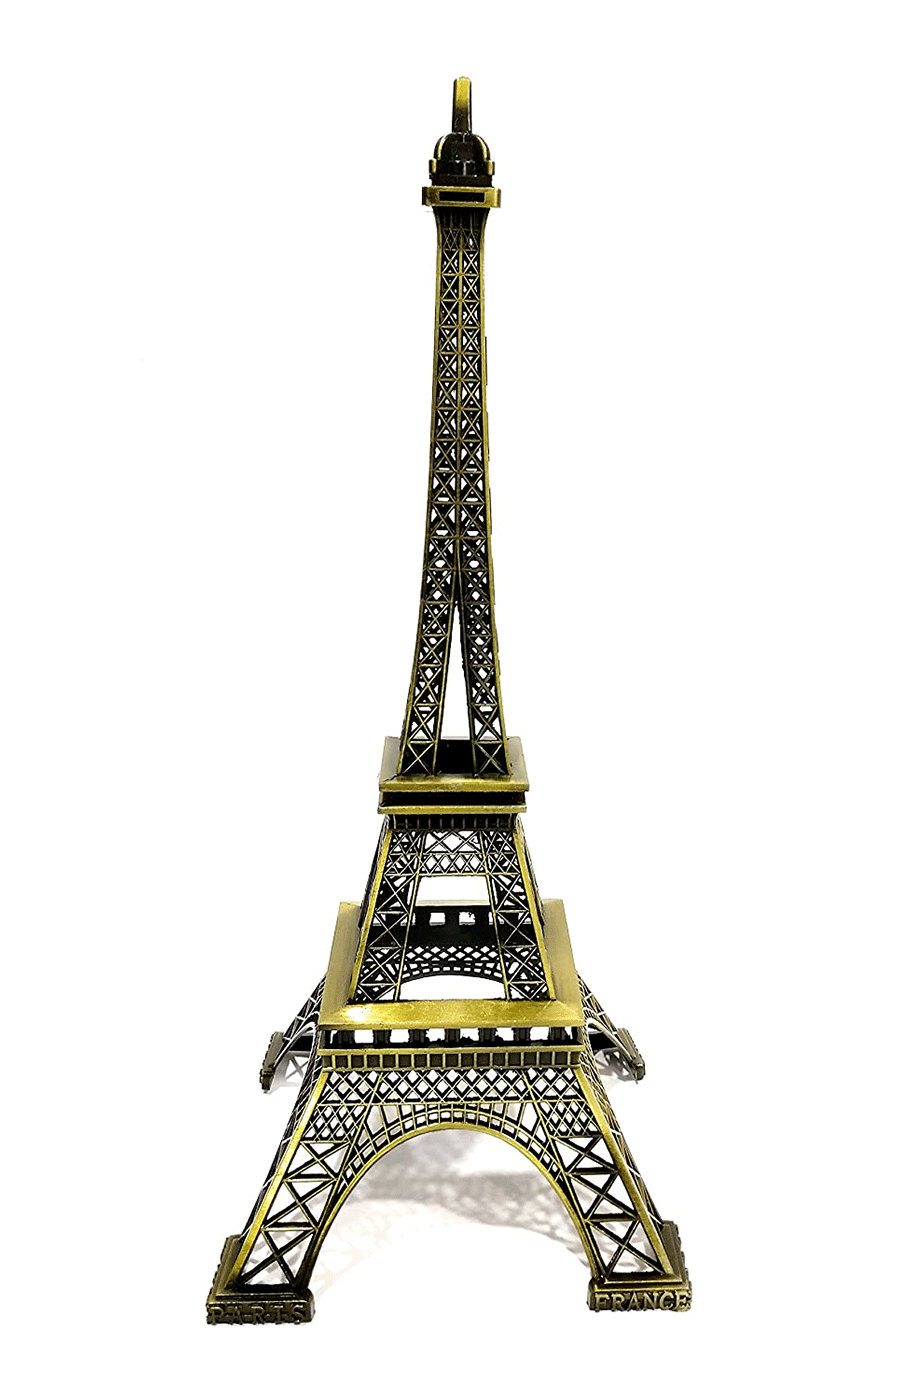 FunkyTradition 13 cm Tall Eiffel Tower Statue Metal Showpiece | Birthday and Home Office Decor 5" Tall